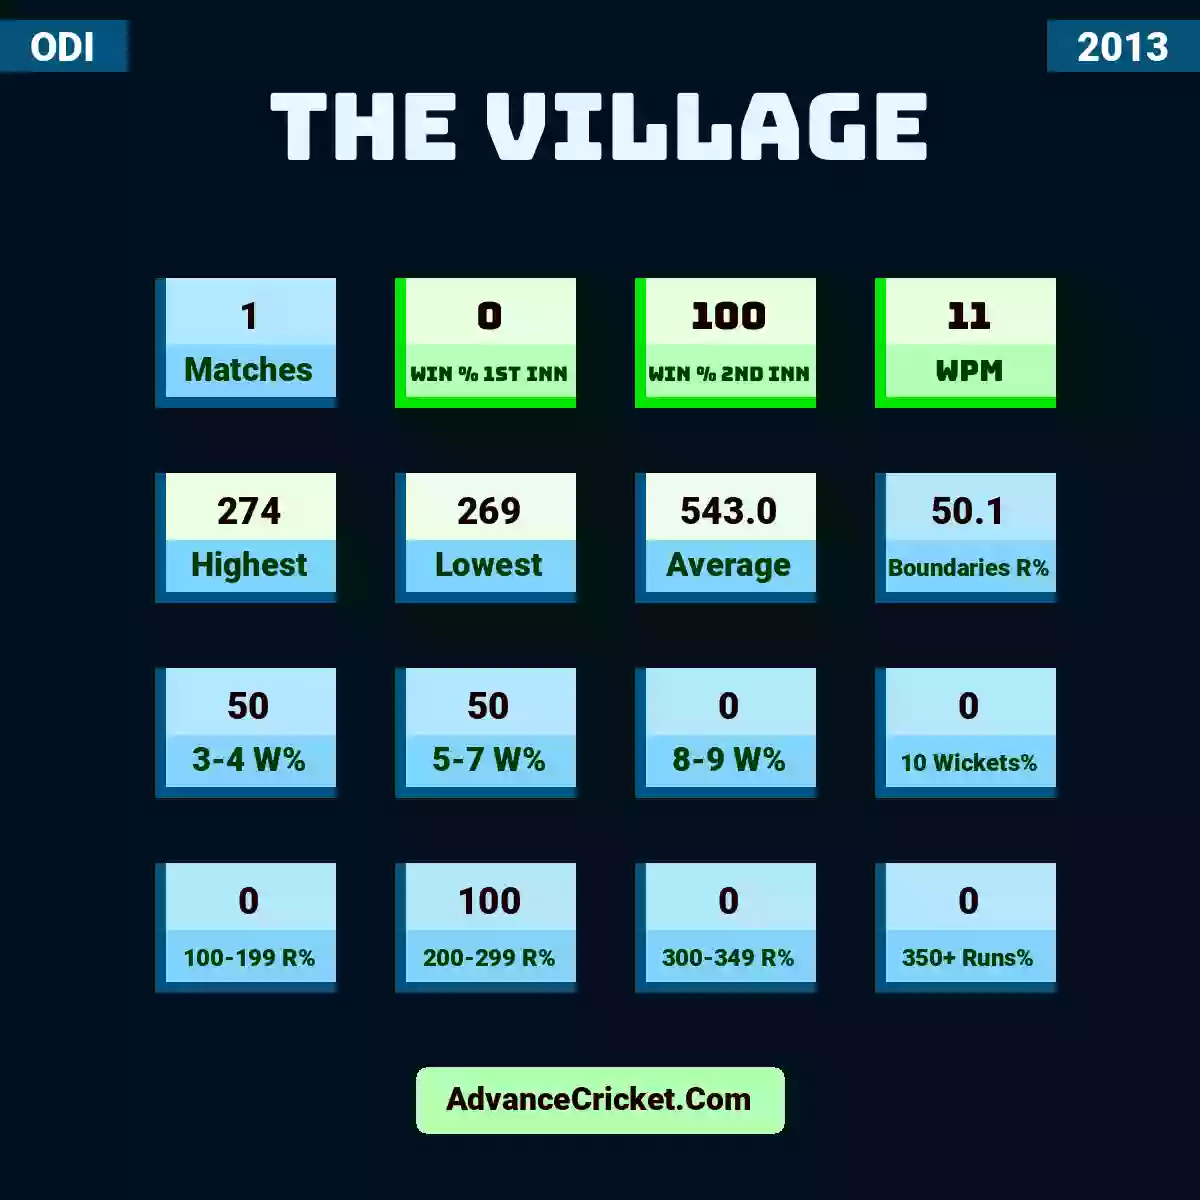 Image showing The Village with Matches: 1, Win % 1st Inn: 0, Win % 2nd Inn: 100, WPM: 11, Highest: 274, Lowest: 269, Average: 543.0, Boundaries R%: 50.1, 3-4 W%: 50, 5-7 W%: 50, 8-9 W%: 0, 10 Wickets%: 0, 100-199 R%: 0, 200-299 R%: 100, 300-349 R%: 0, 350+ Runs%: 0.